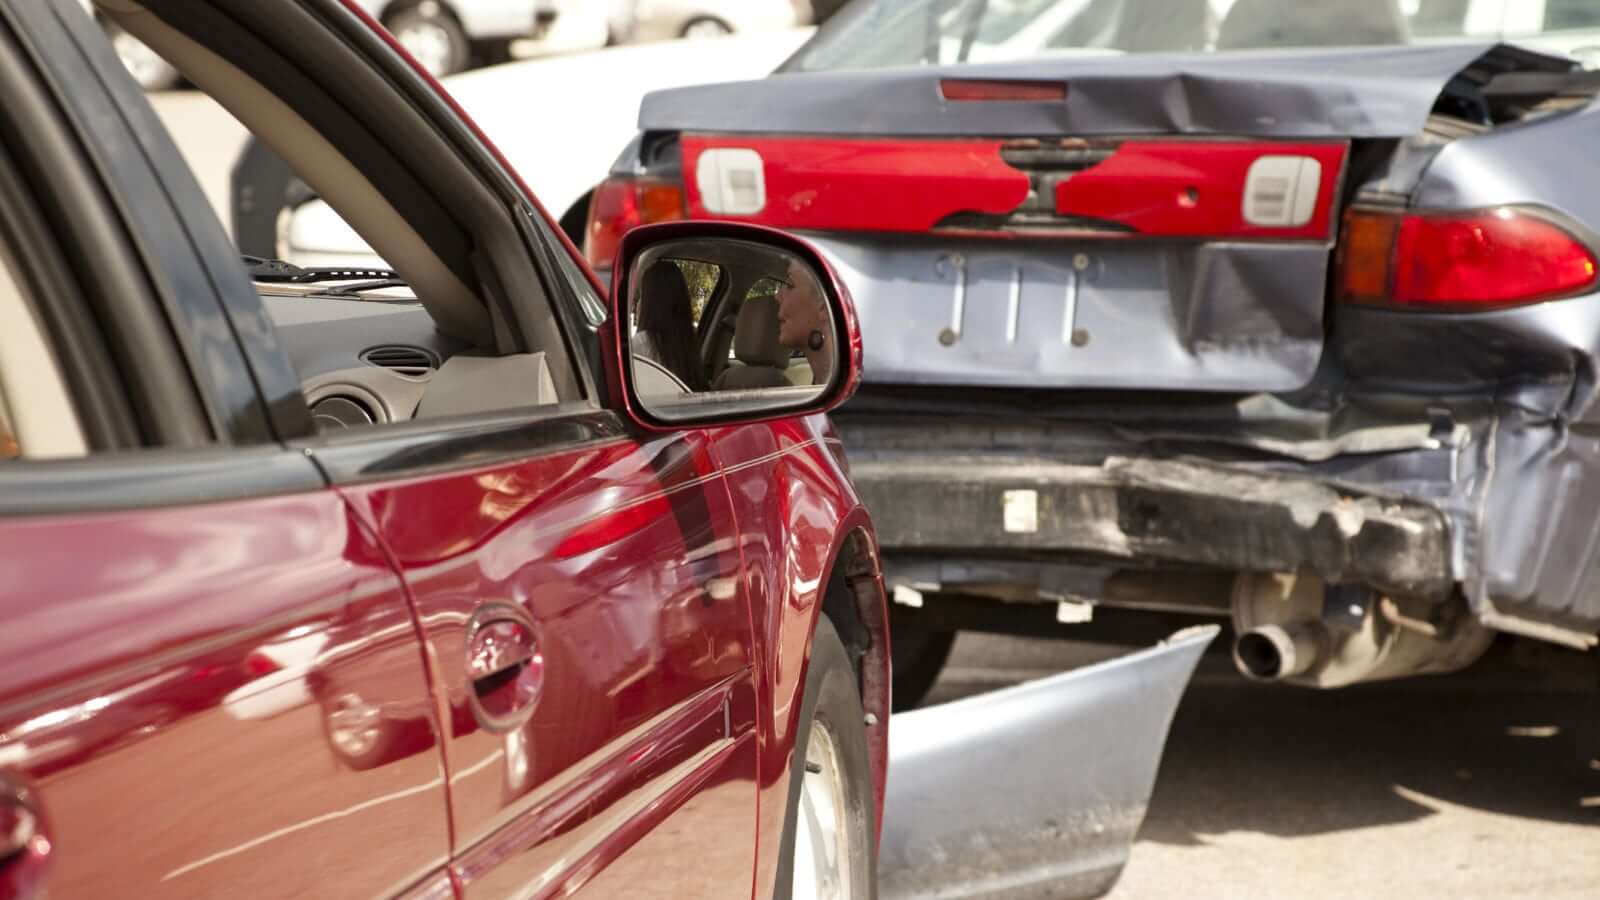 When Is The Car Owner At Fault For The Accident? Bandas